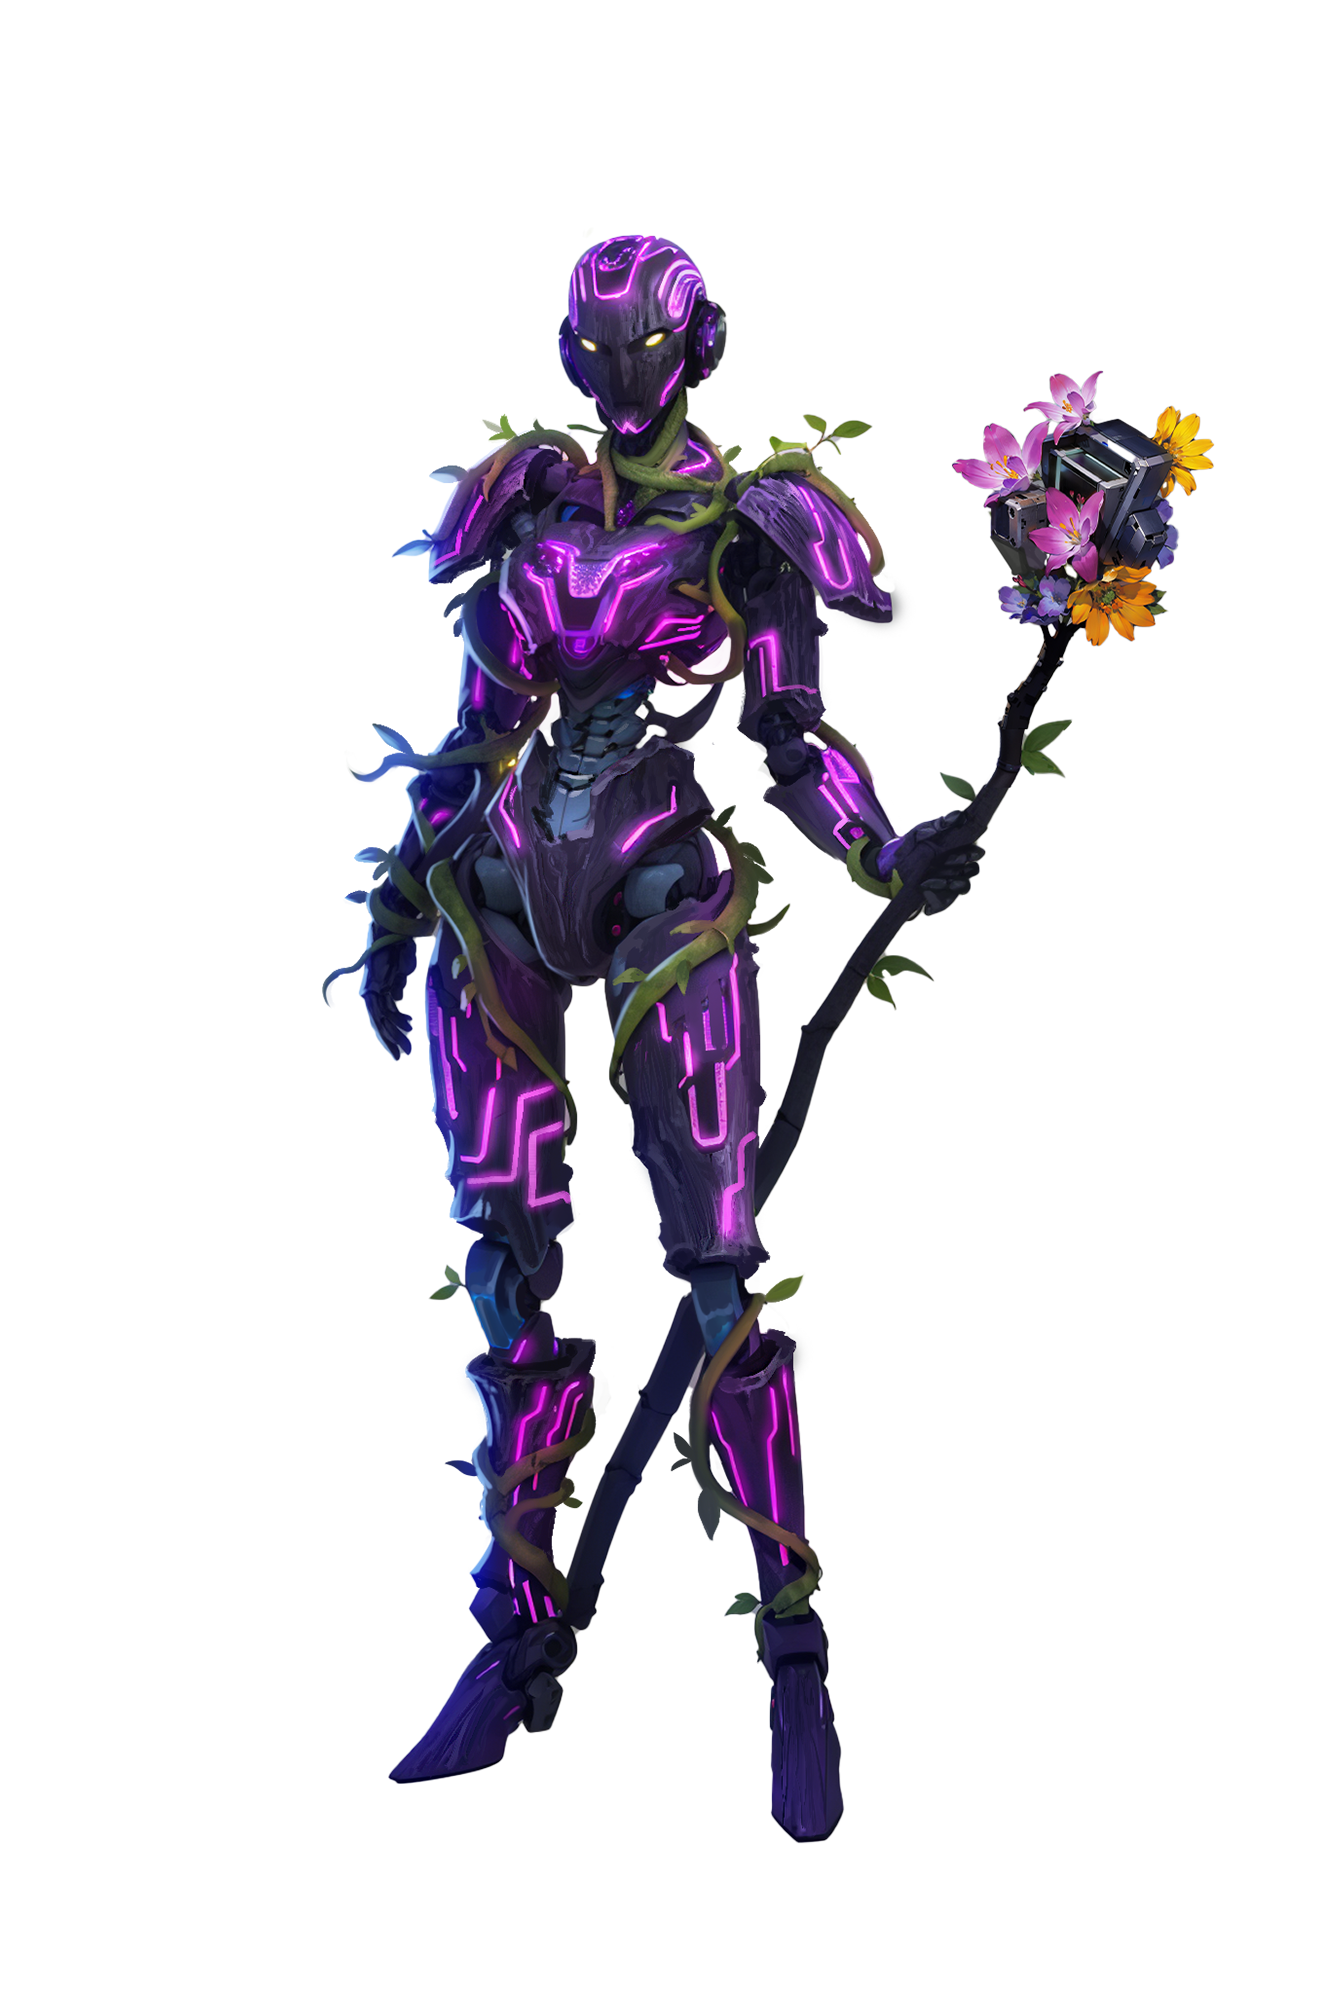 A humanoid android with purple lights and viney plants growing around them and on the staff they are holding